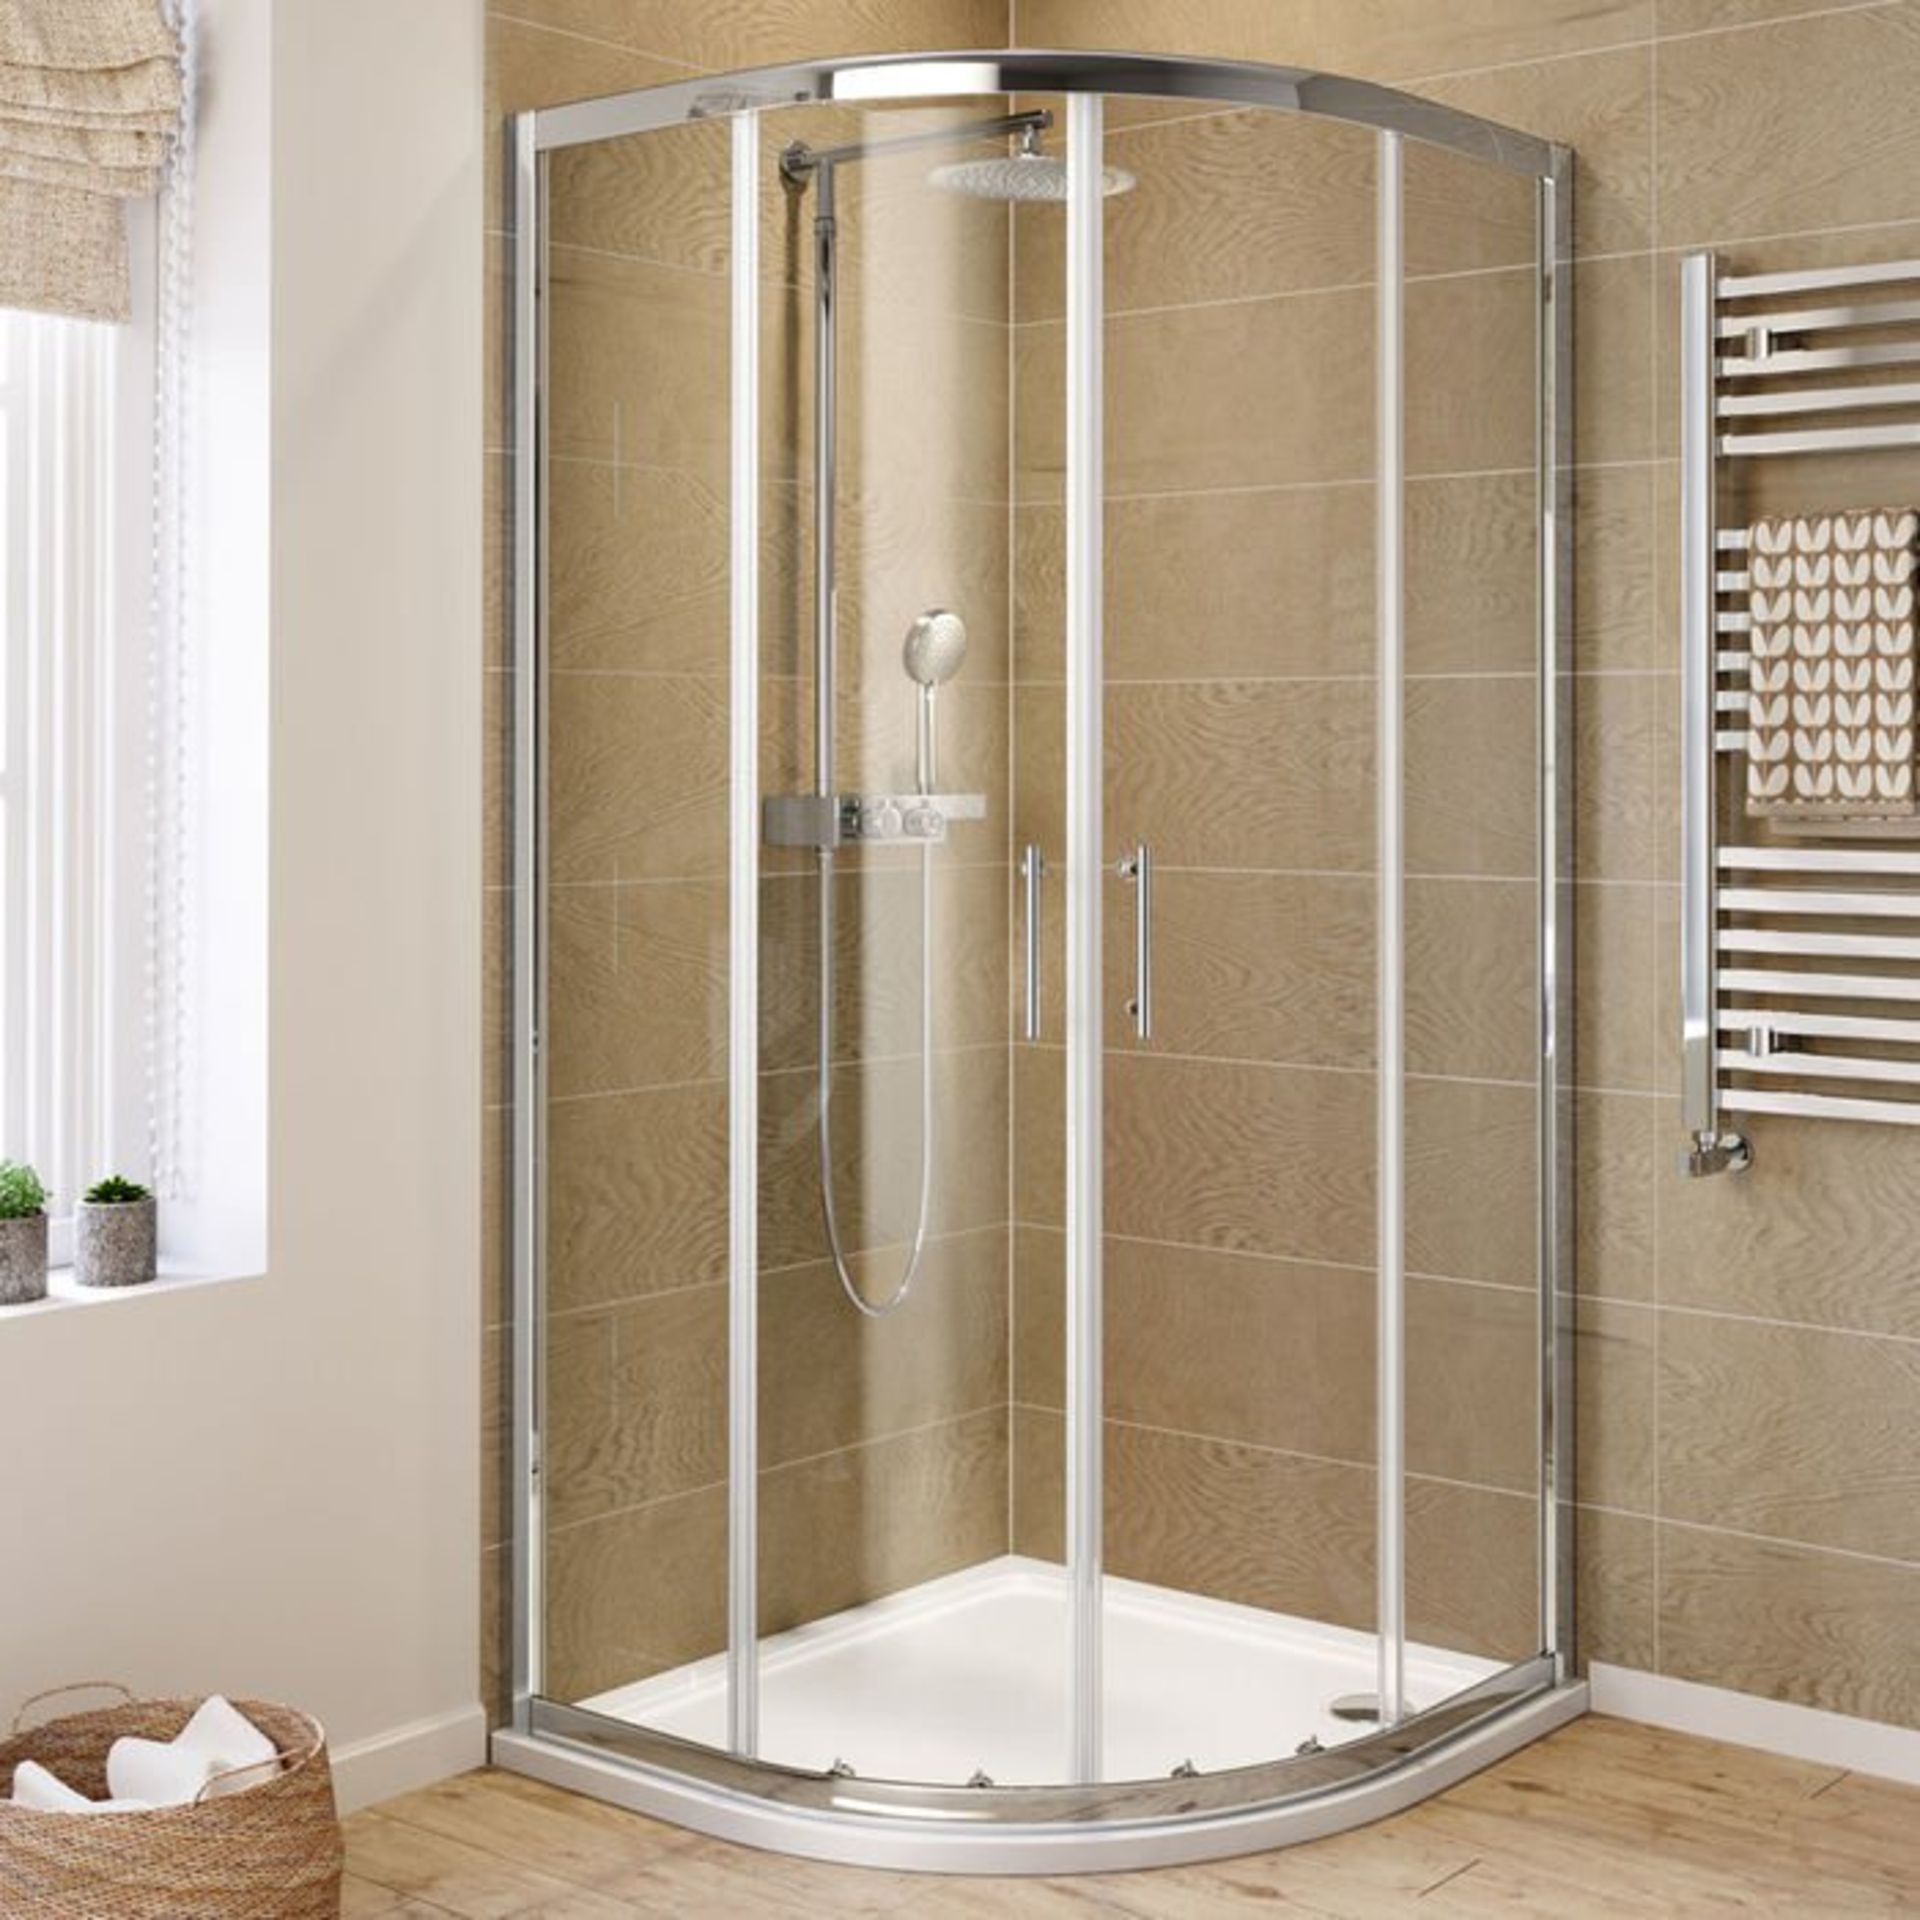 (H159) 800x800mm - 6mm - Elements Quadrant Shower Enclosure. RRP £272.99. 6mm Safety Glass Fully - Image 2 of 8